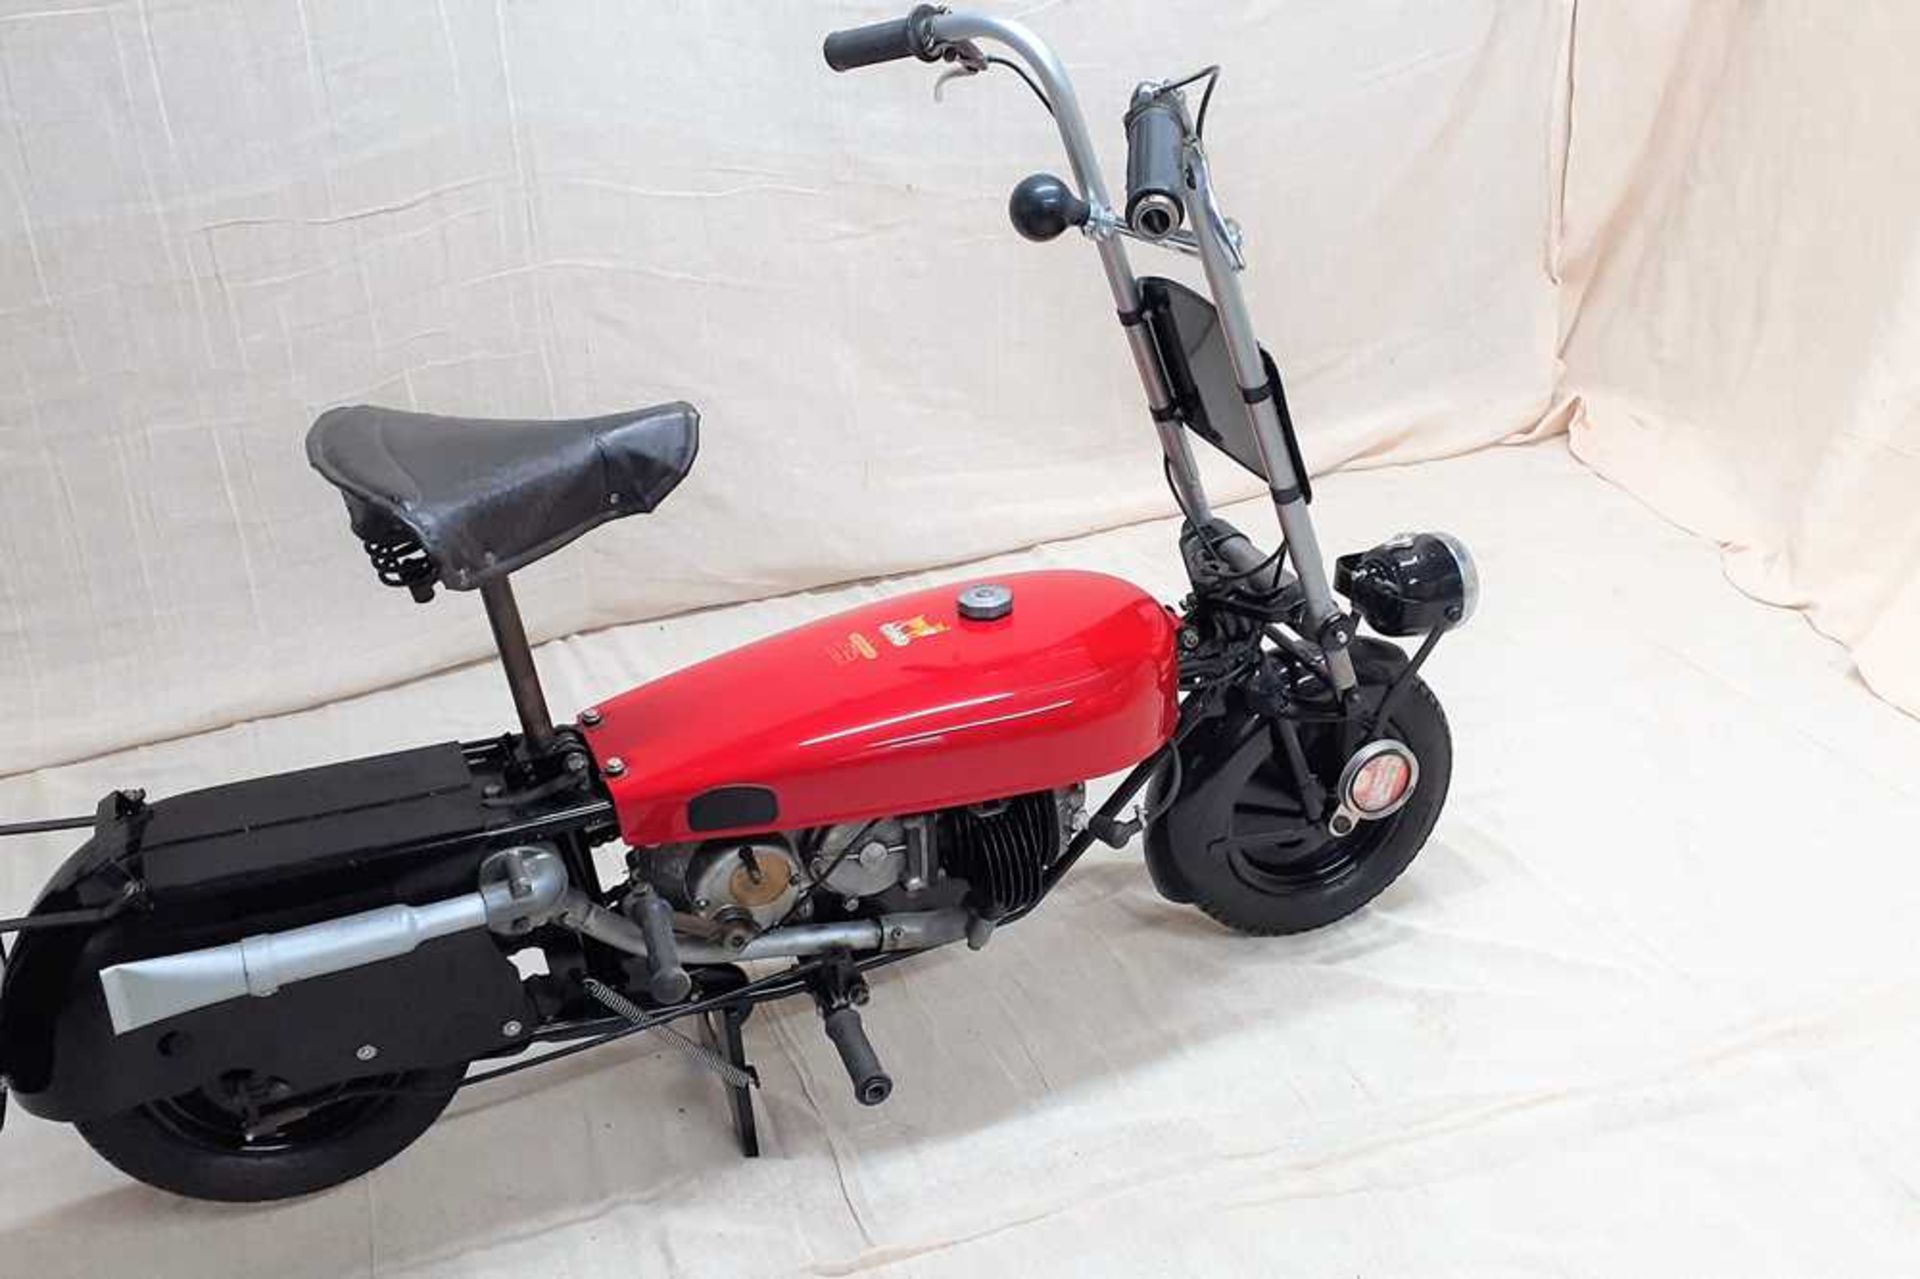 3x Corgi Motorcycles All are to be sold as one LOT - Image 13 of 30